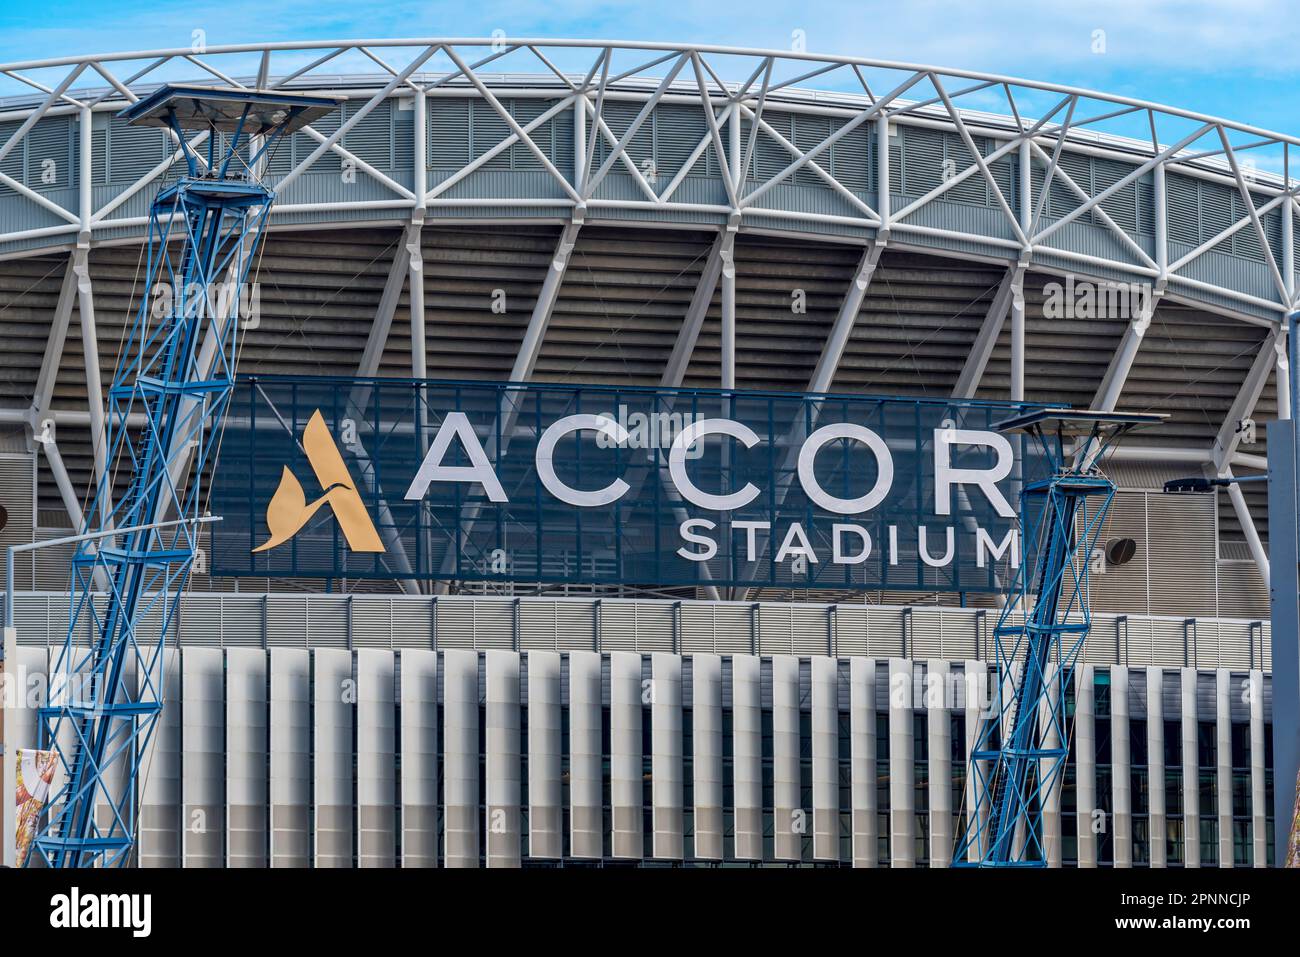 Accor hotel group have the current naming rights to the Sydney 2000 Olympics stadium at Sydney Olympic Park in New South Wales, Australia Stock Photo